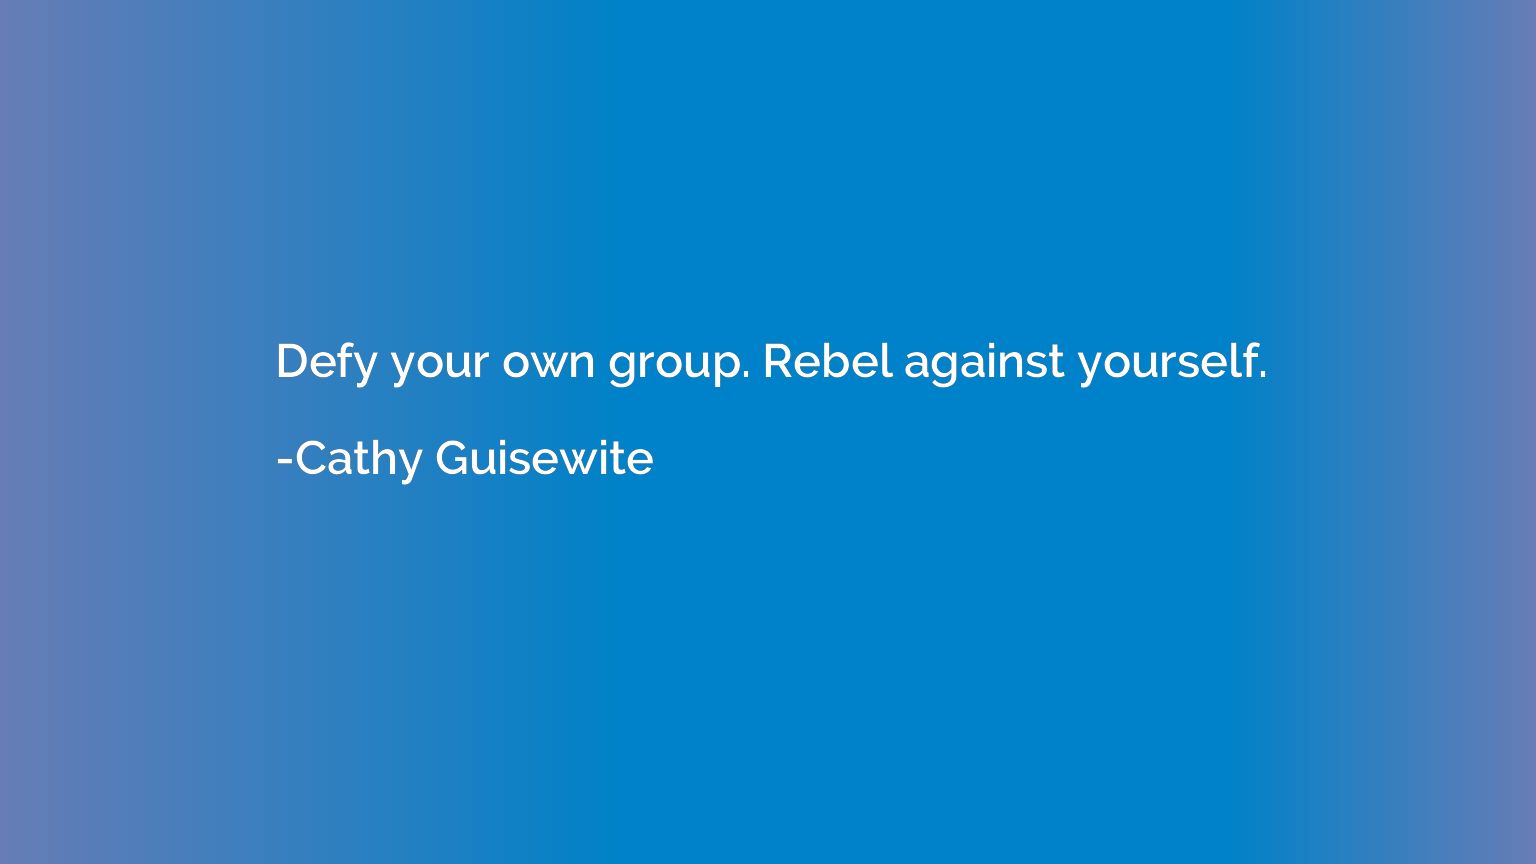 Defy your own group. Rebel against yourself.